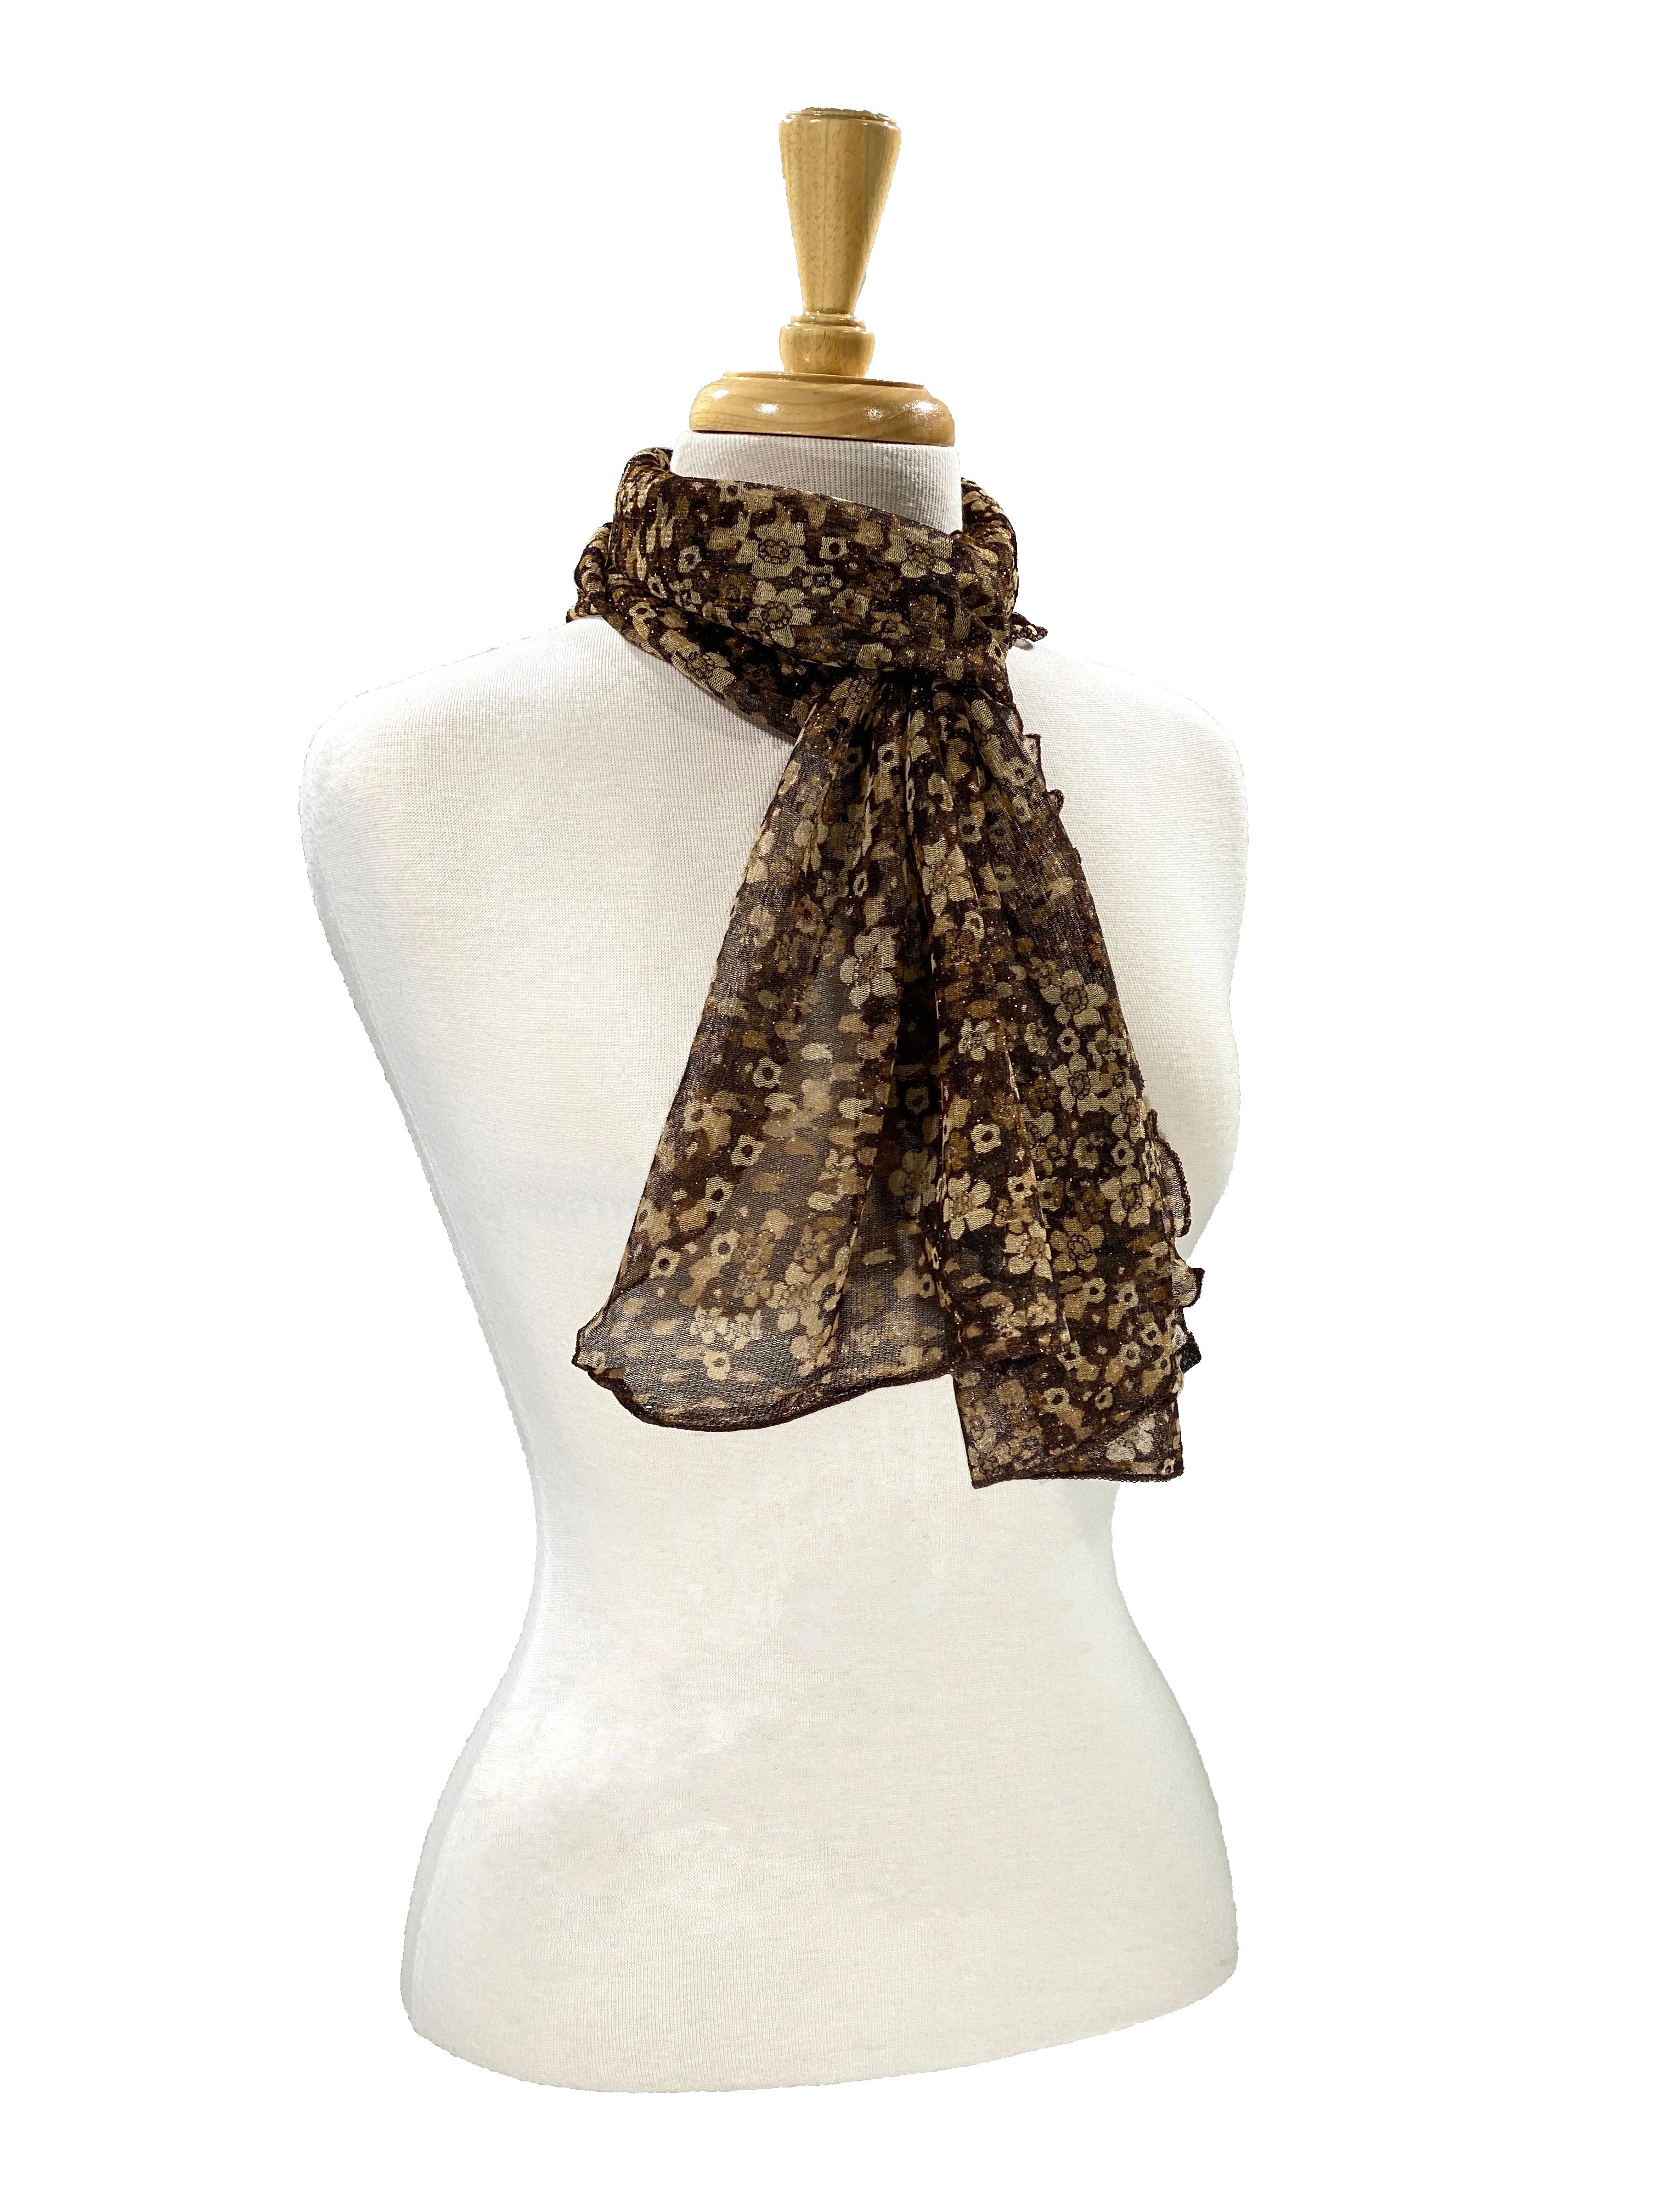 Shimmer Mini Floral Scarf -Green, Purple, Red, Brown or Teal    